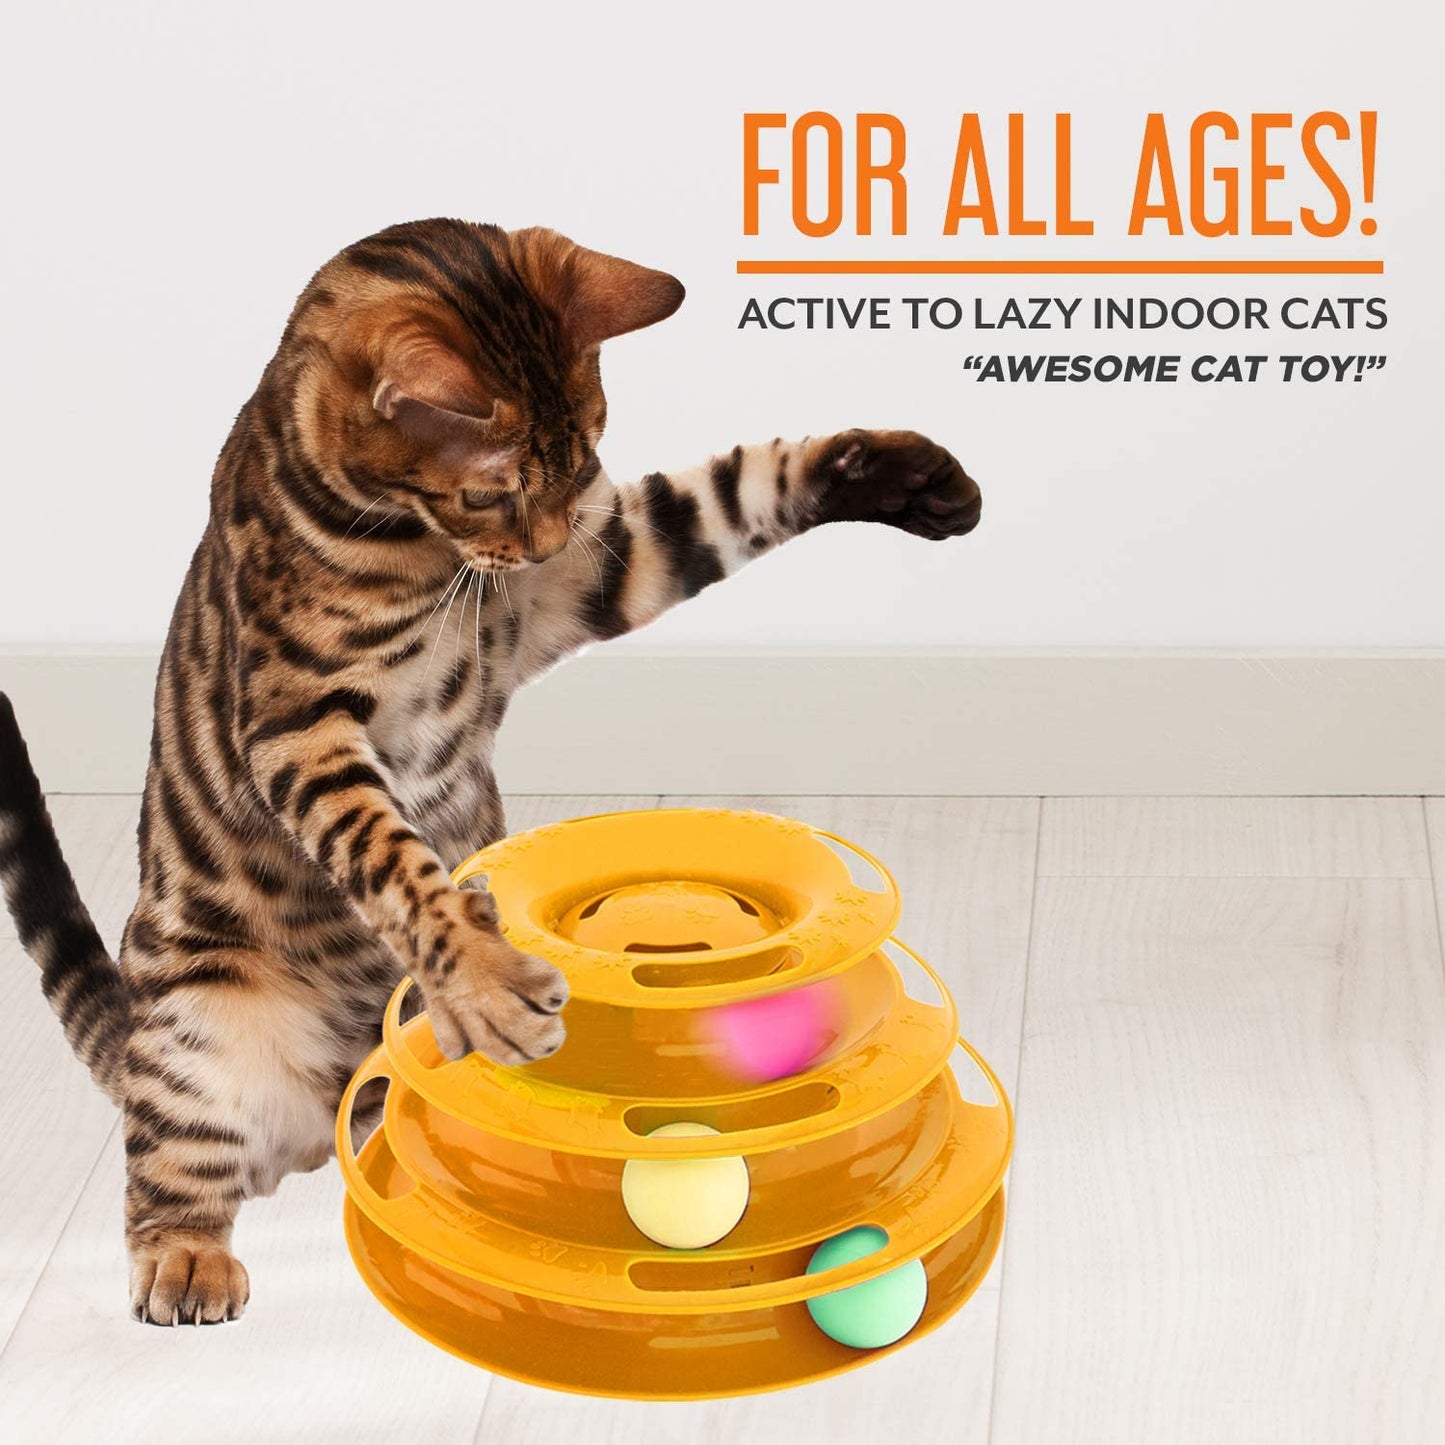 Purrfect Feline Titan's Tower - Interactive Cat Ball Toy